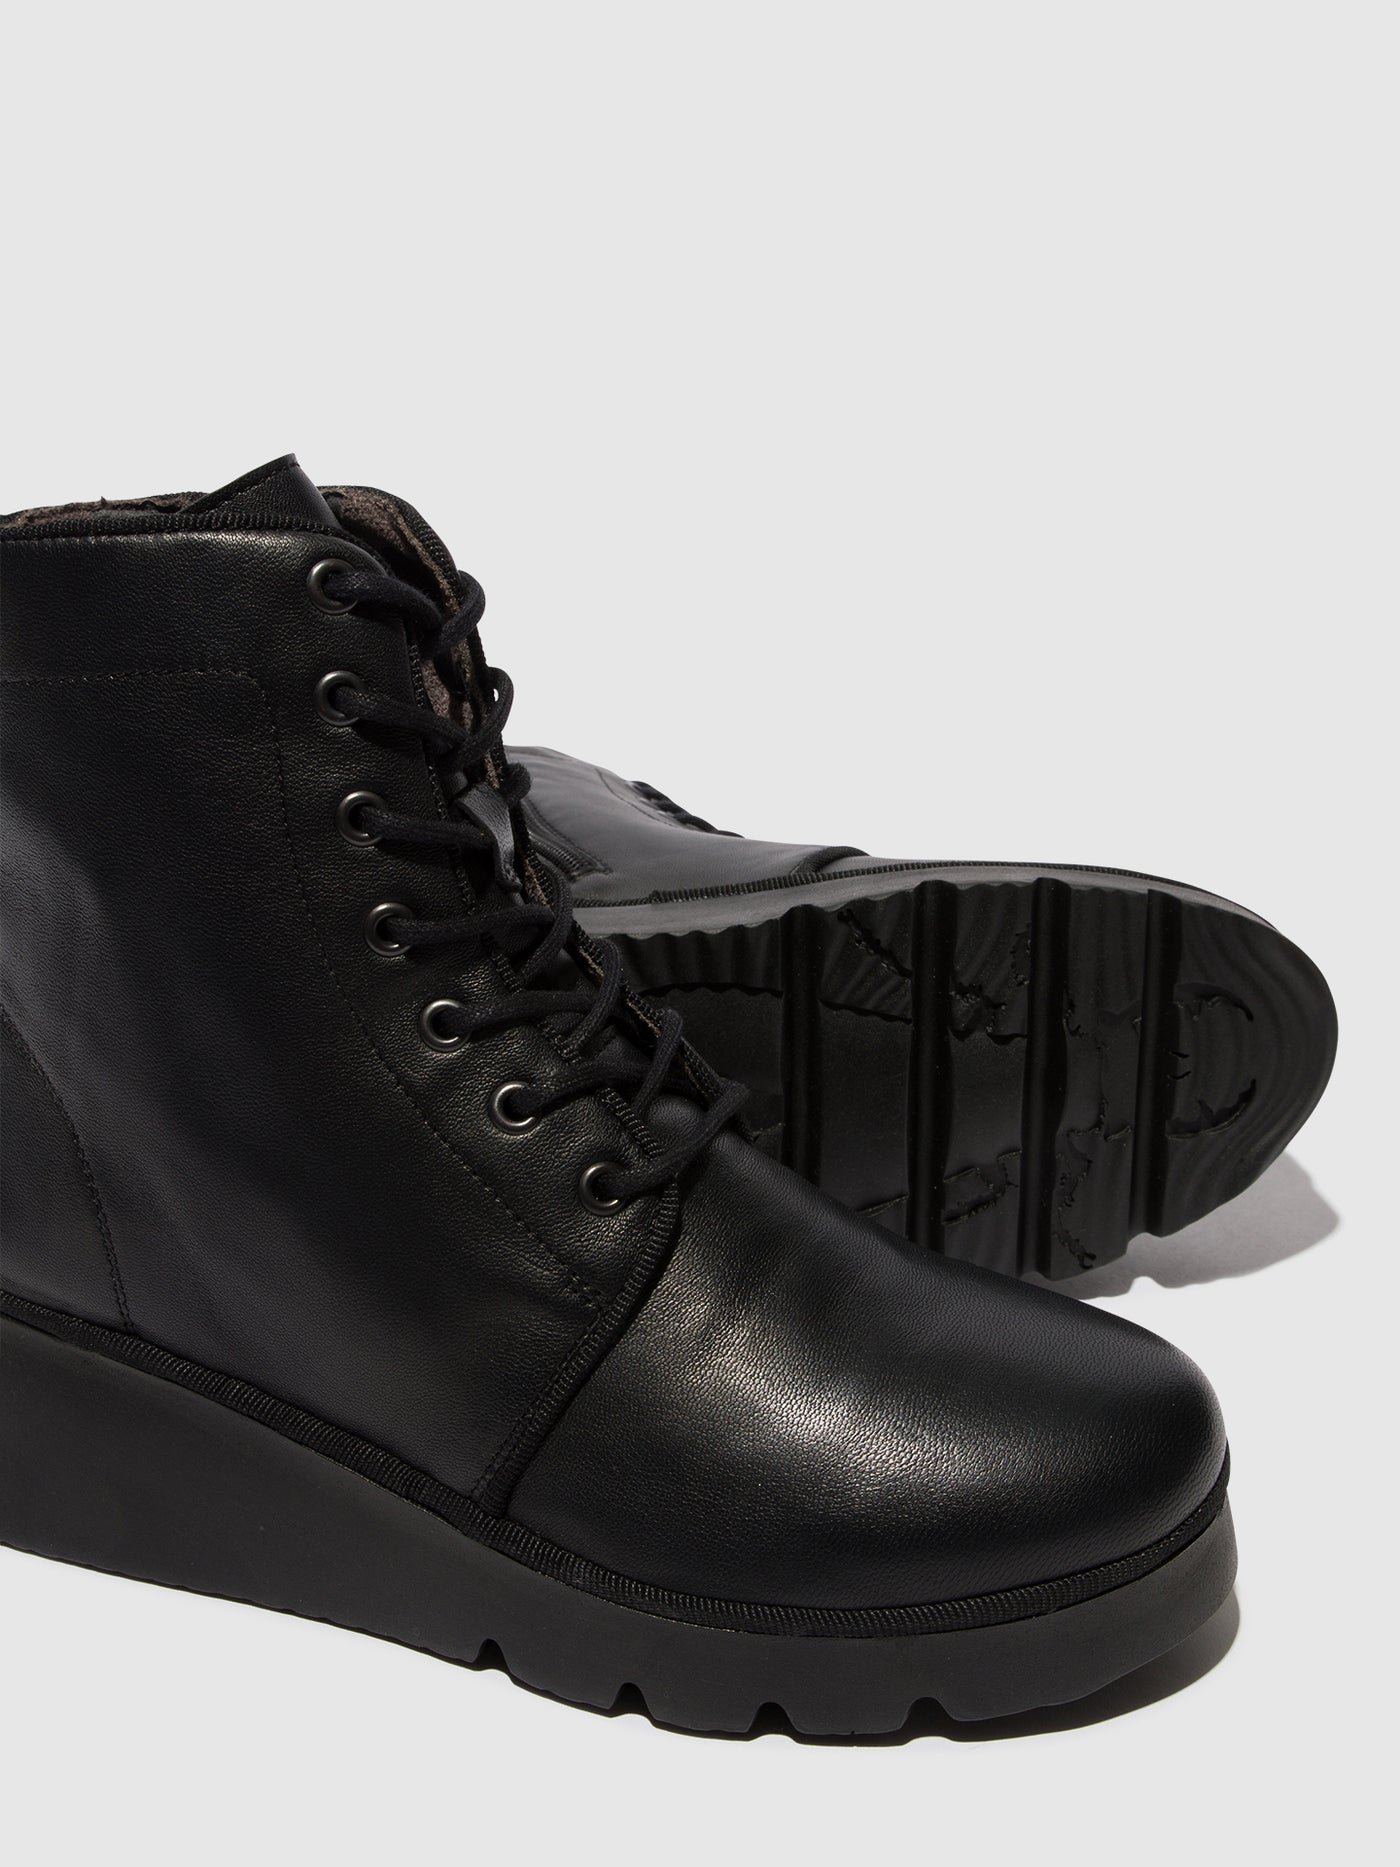 Lace-up Ankle Boots PALL404FLY BLACK